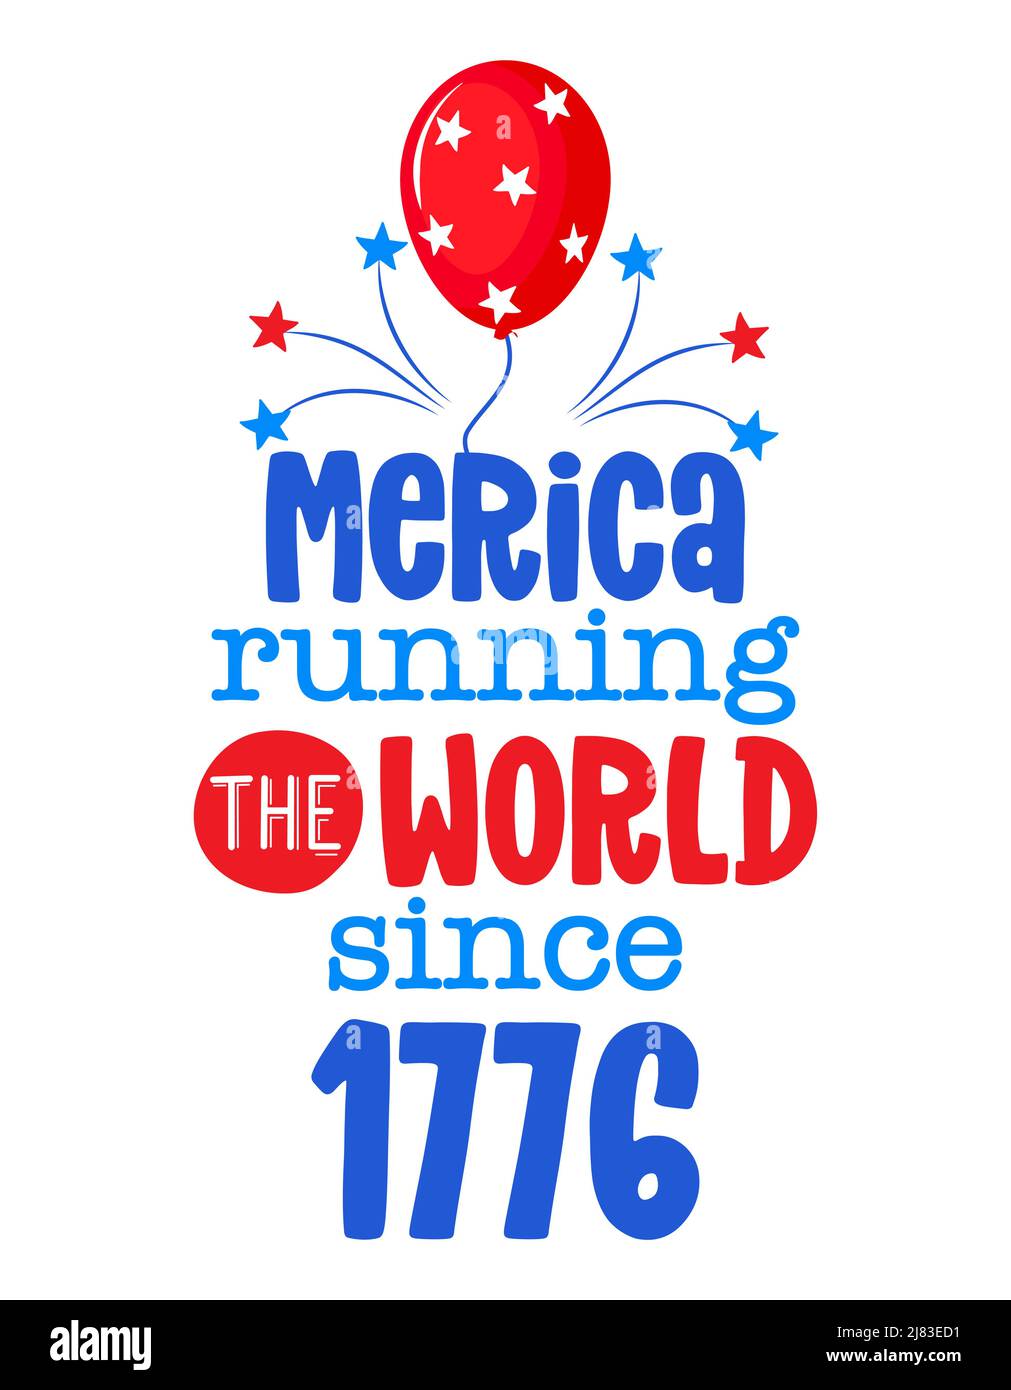 America running the world since 1776 - Happy Independence Day July 4th lettering illustration. Good for advertising, poster, announcement, invitation, Stock Vector